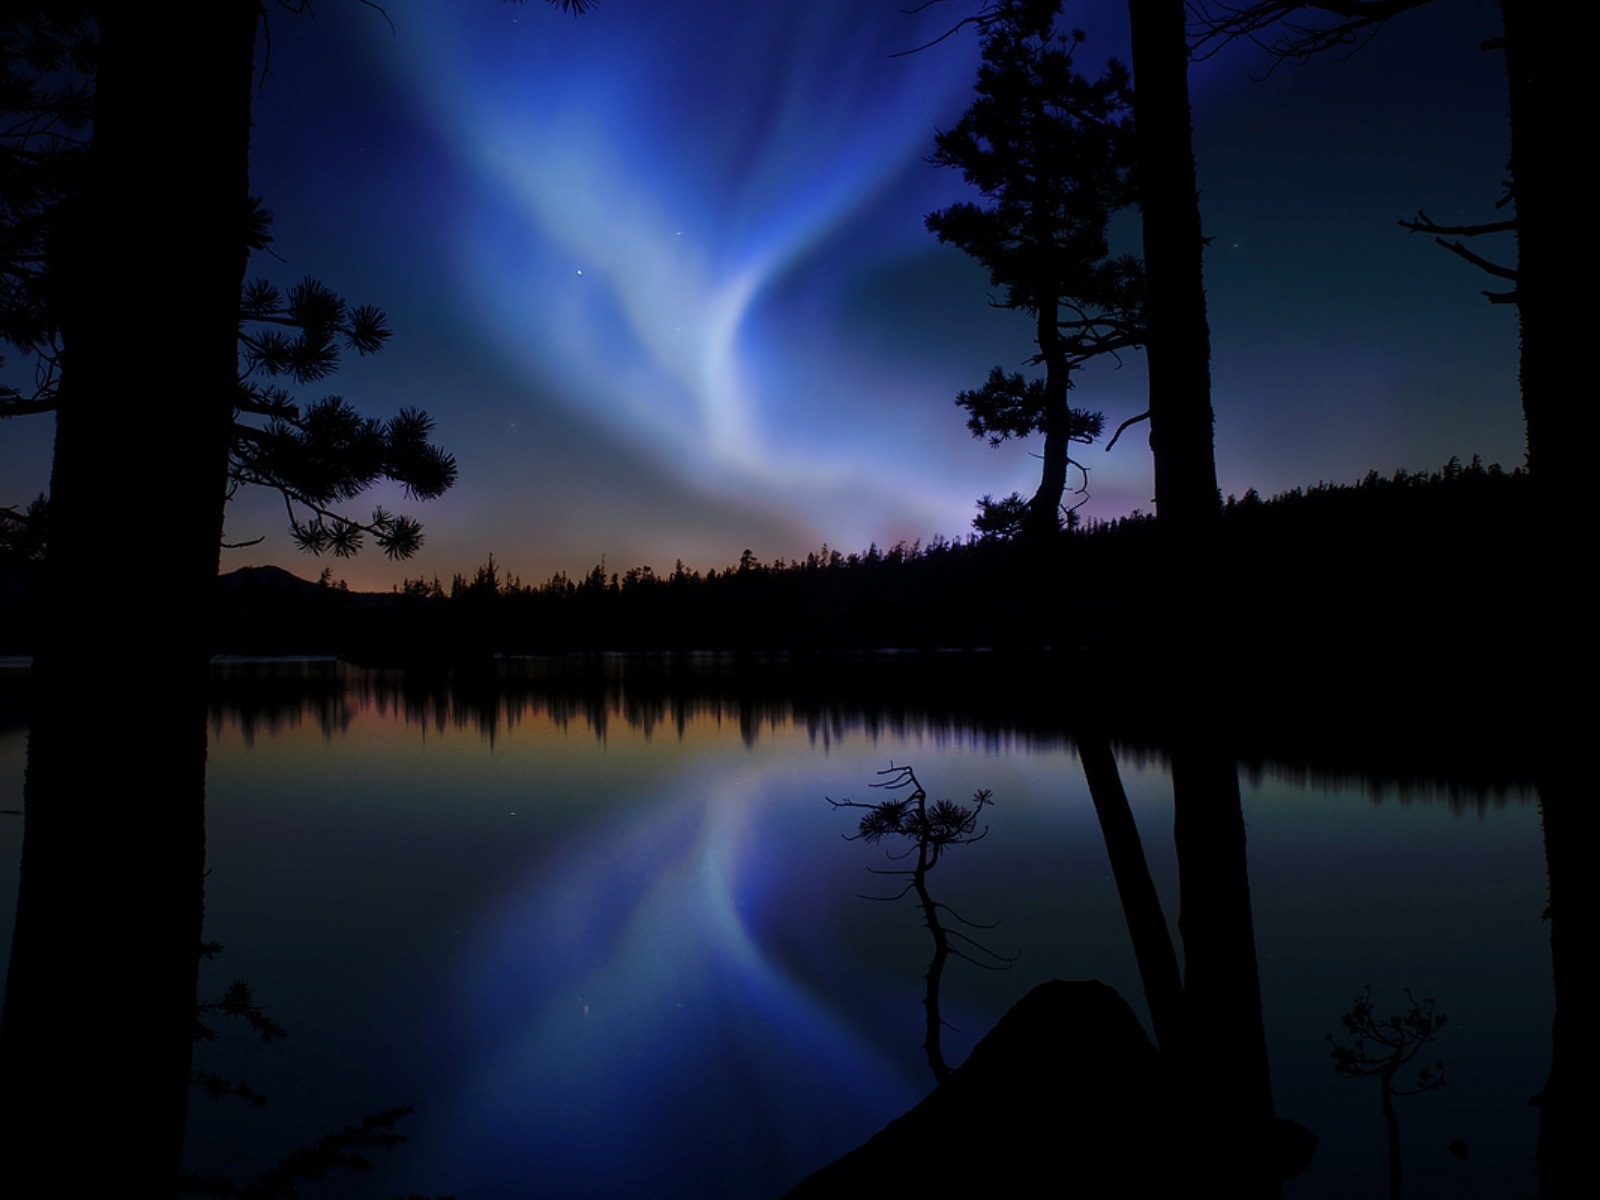 Natural wonders of the Northern Lights HD Wallpaper (1) #11 - 1600x1200